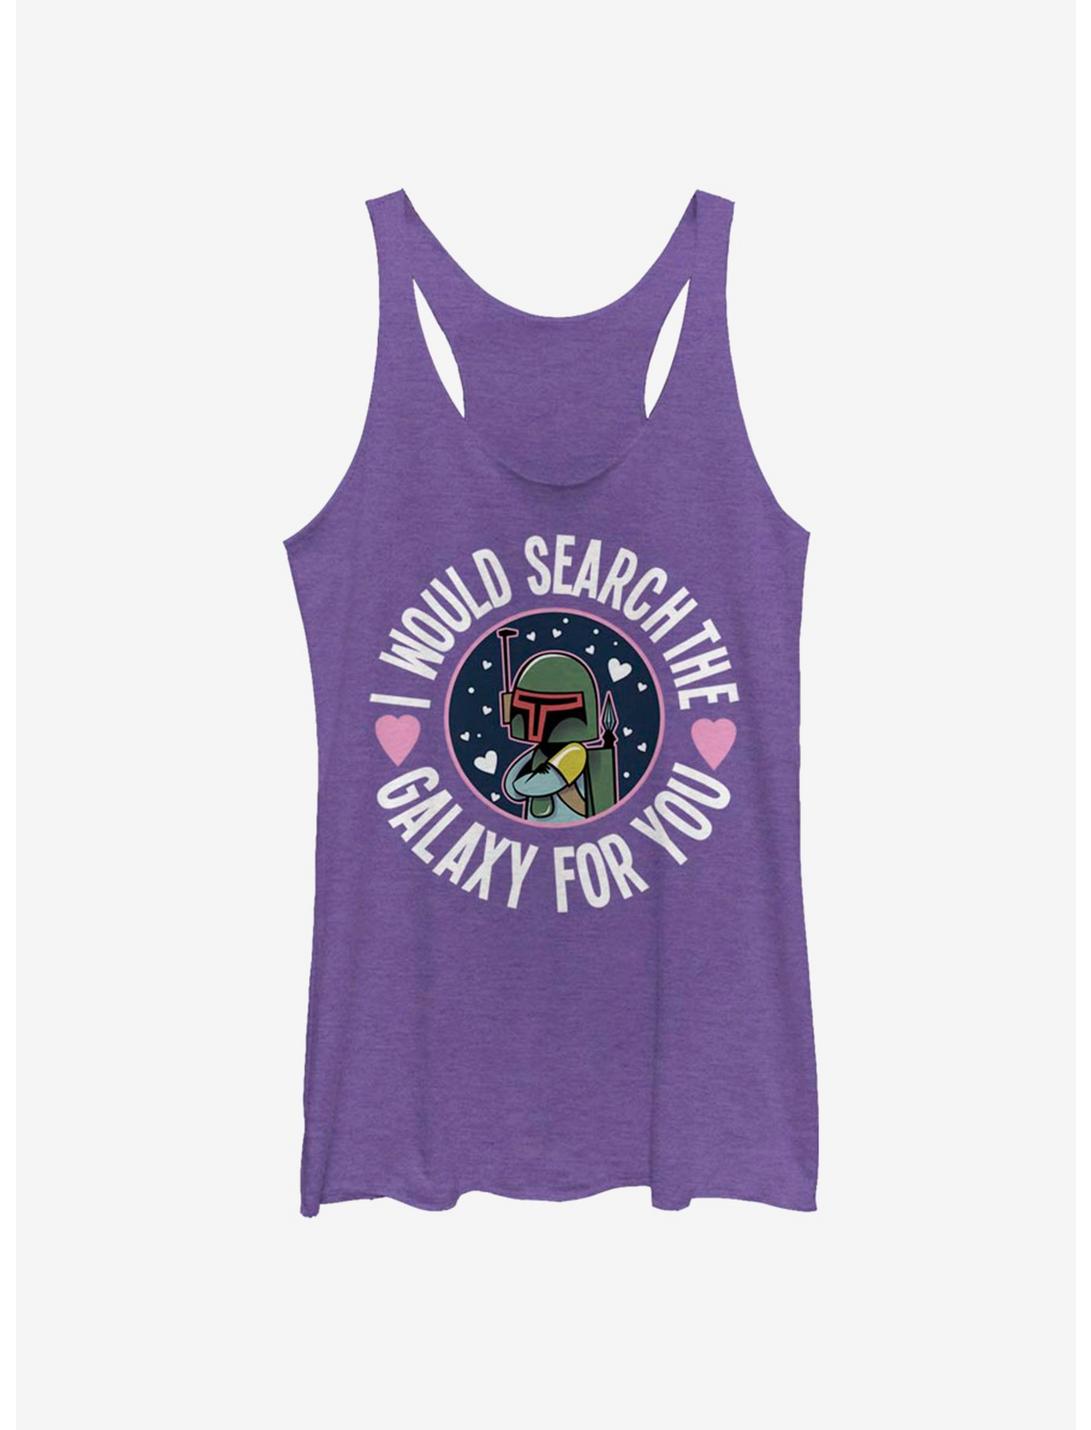 Star Wars Search The Galaxy Womens Tank Top, PUR HTR, hi-res